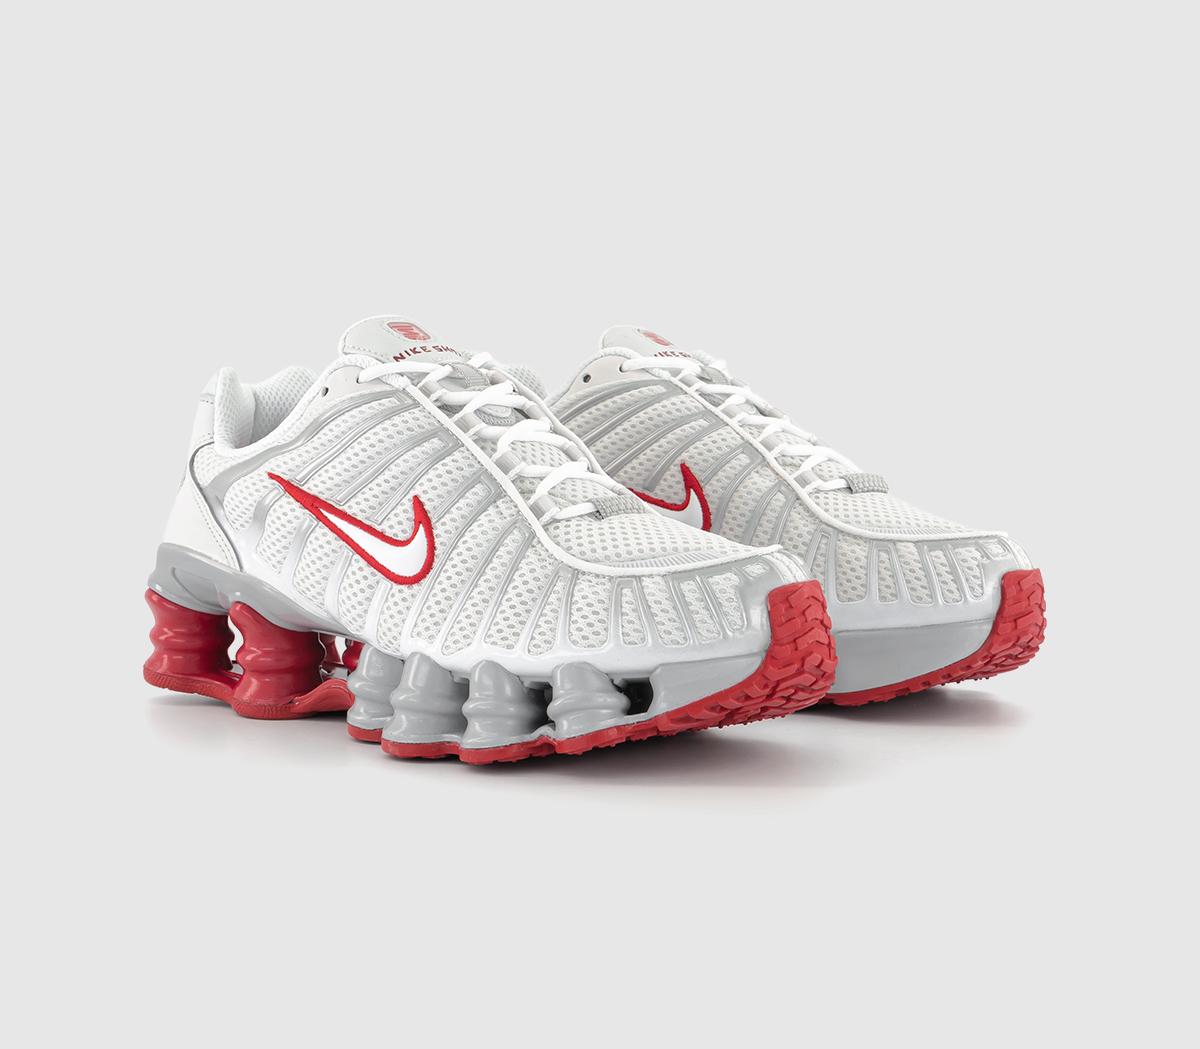 Nike Nike Shox TL Trainers Platinum Tint White Gym Red - Women's Trainers